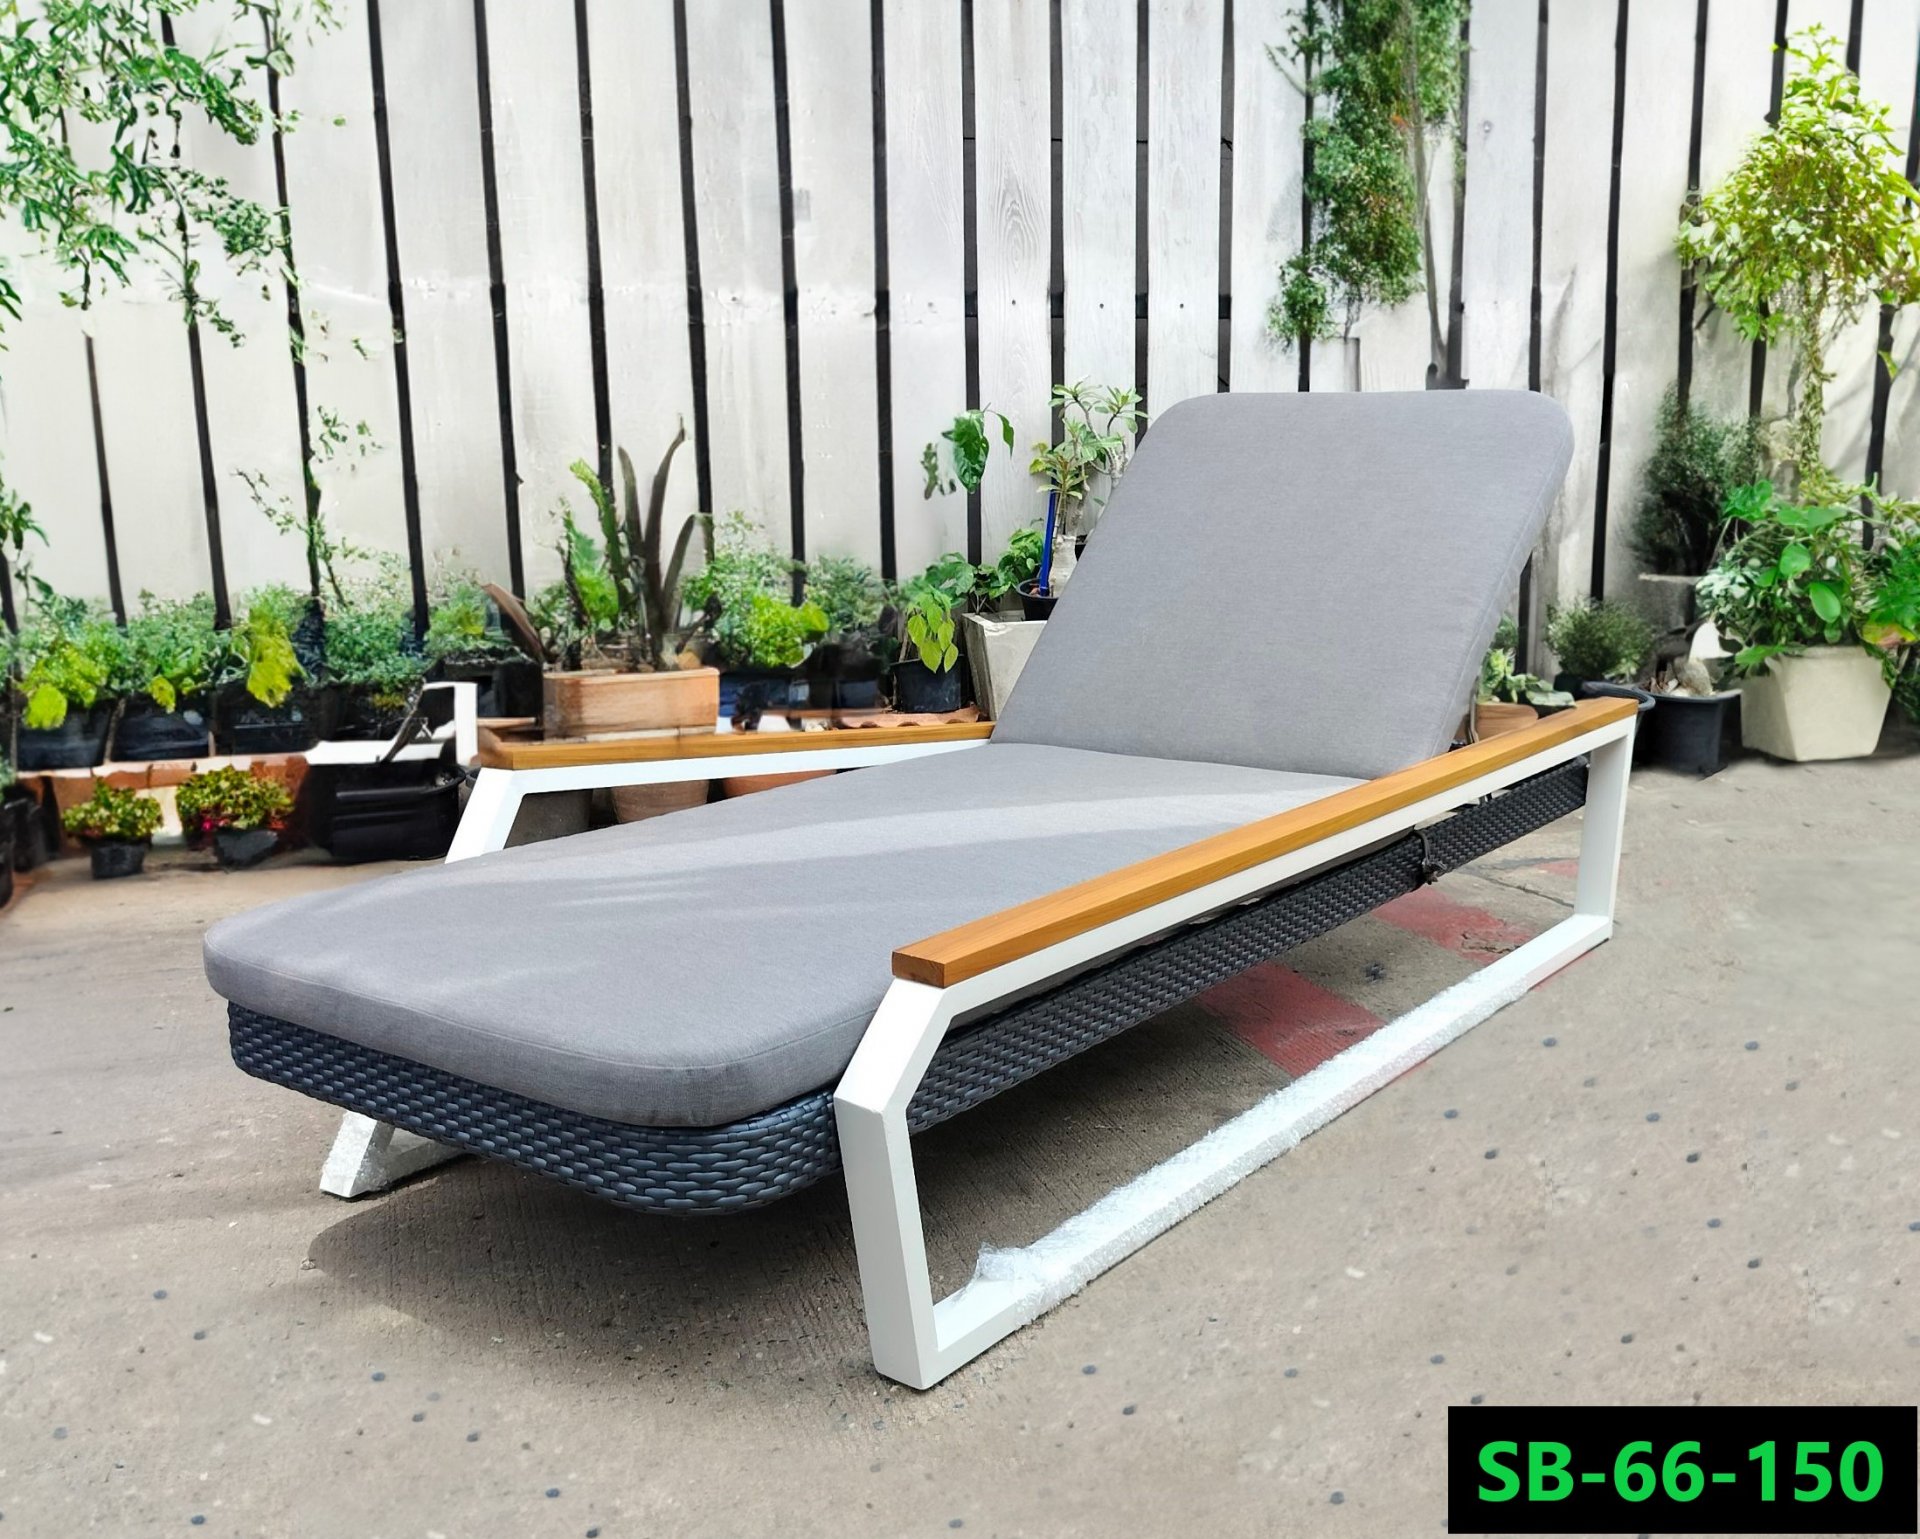 Rattan Sun Lounger/Bed Product code SB-66-150